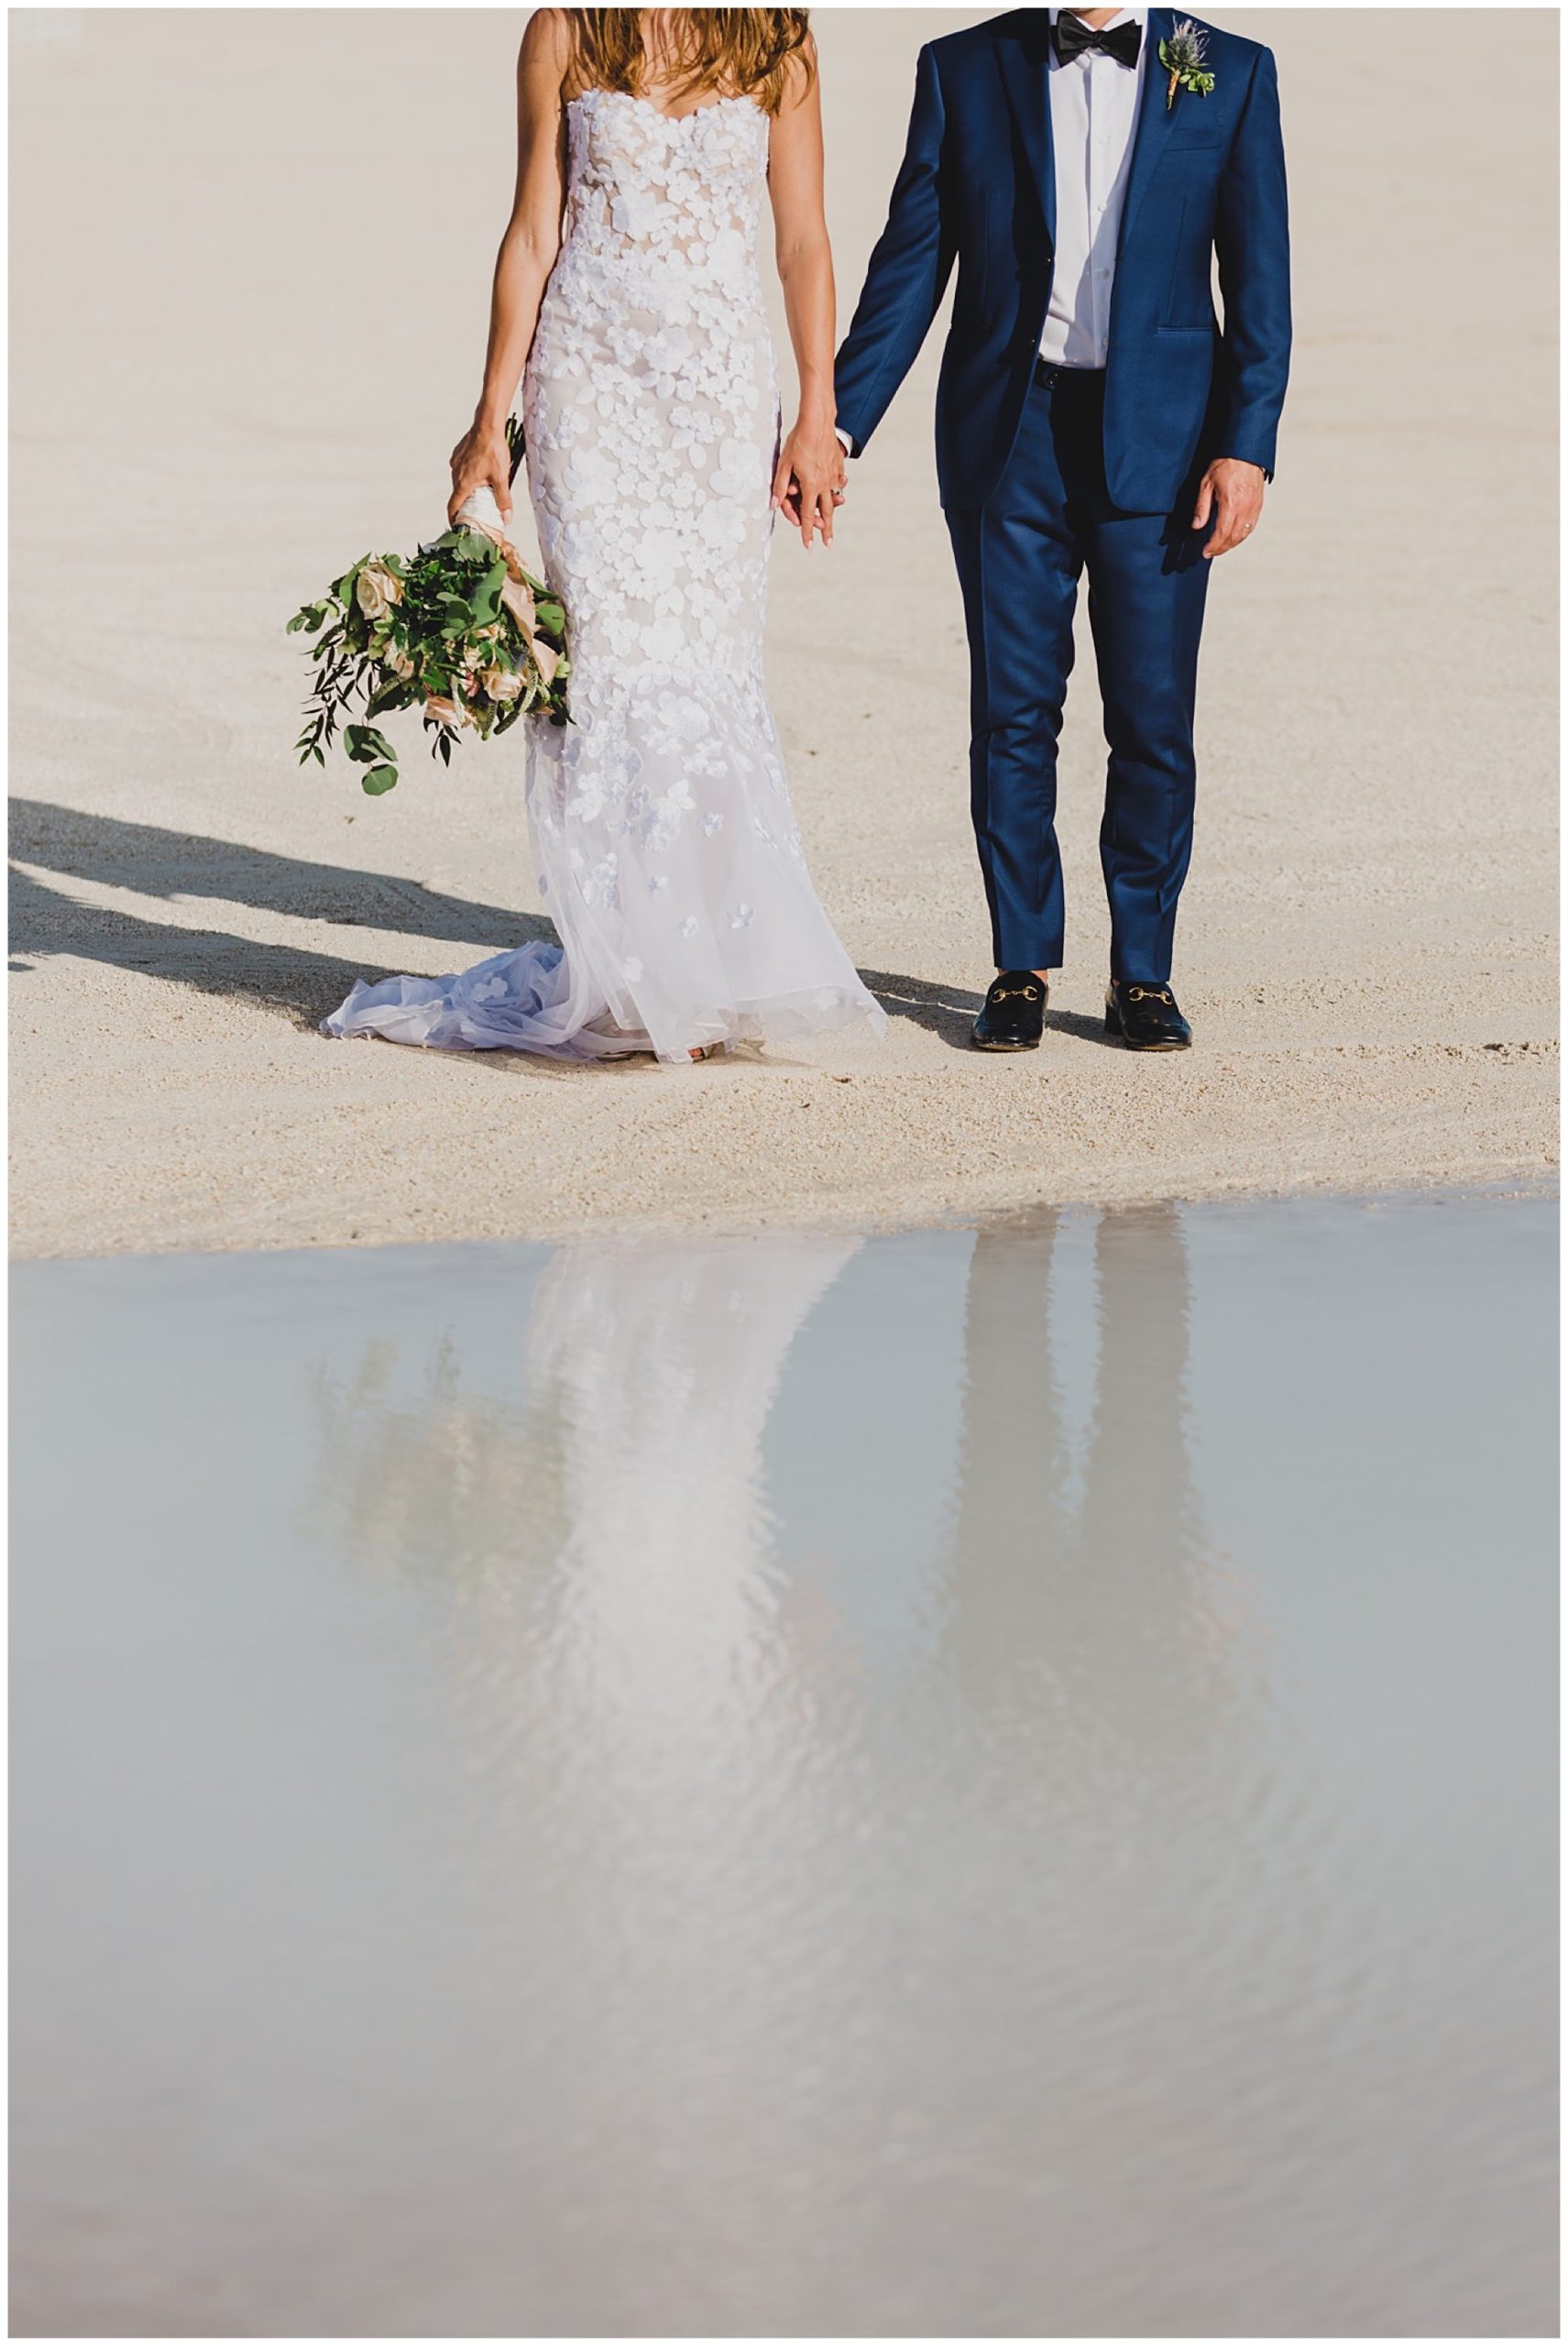 creative water reflection portrait of bride and groom at the beach